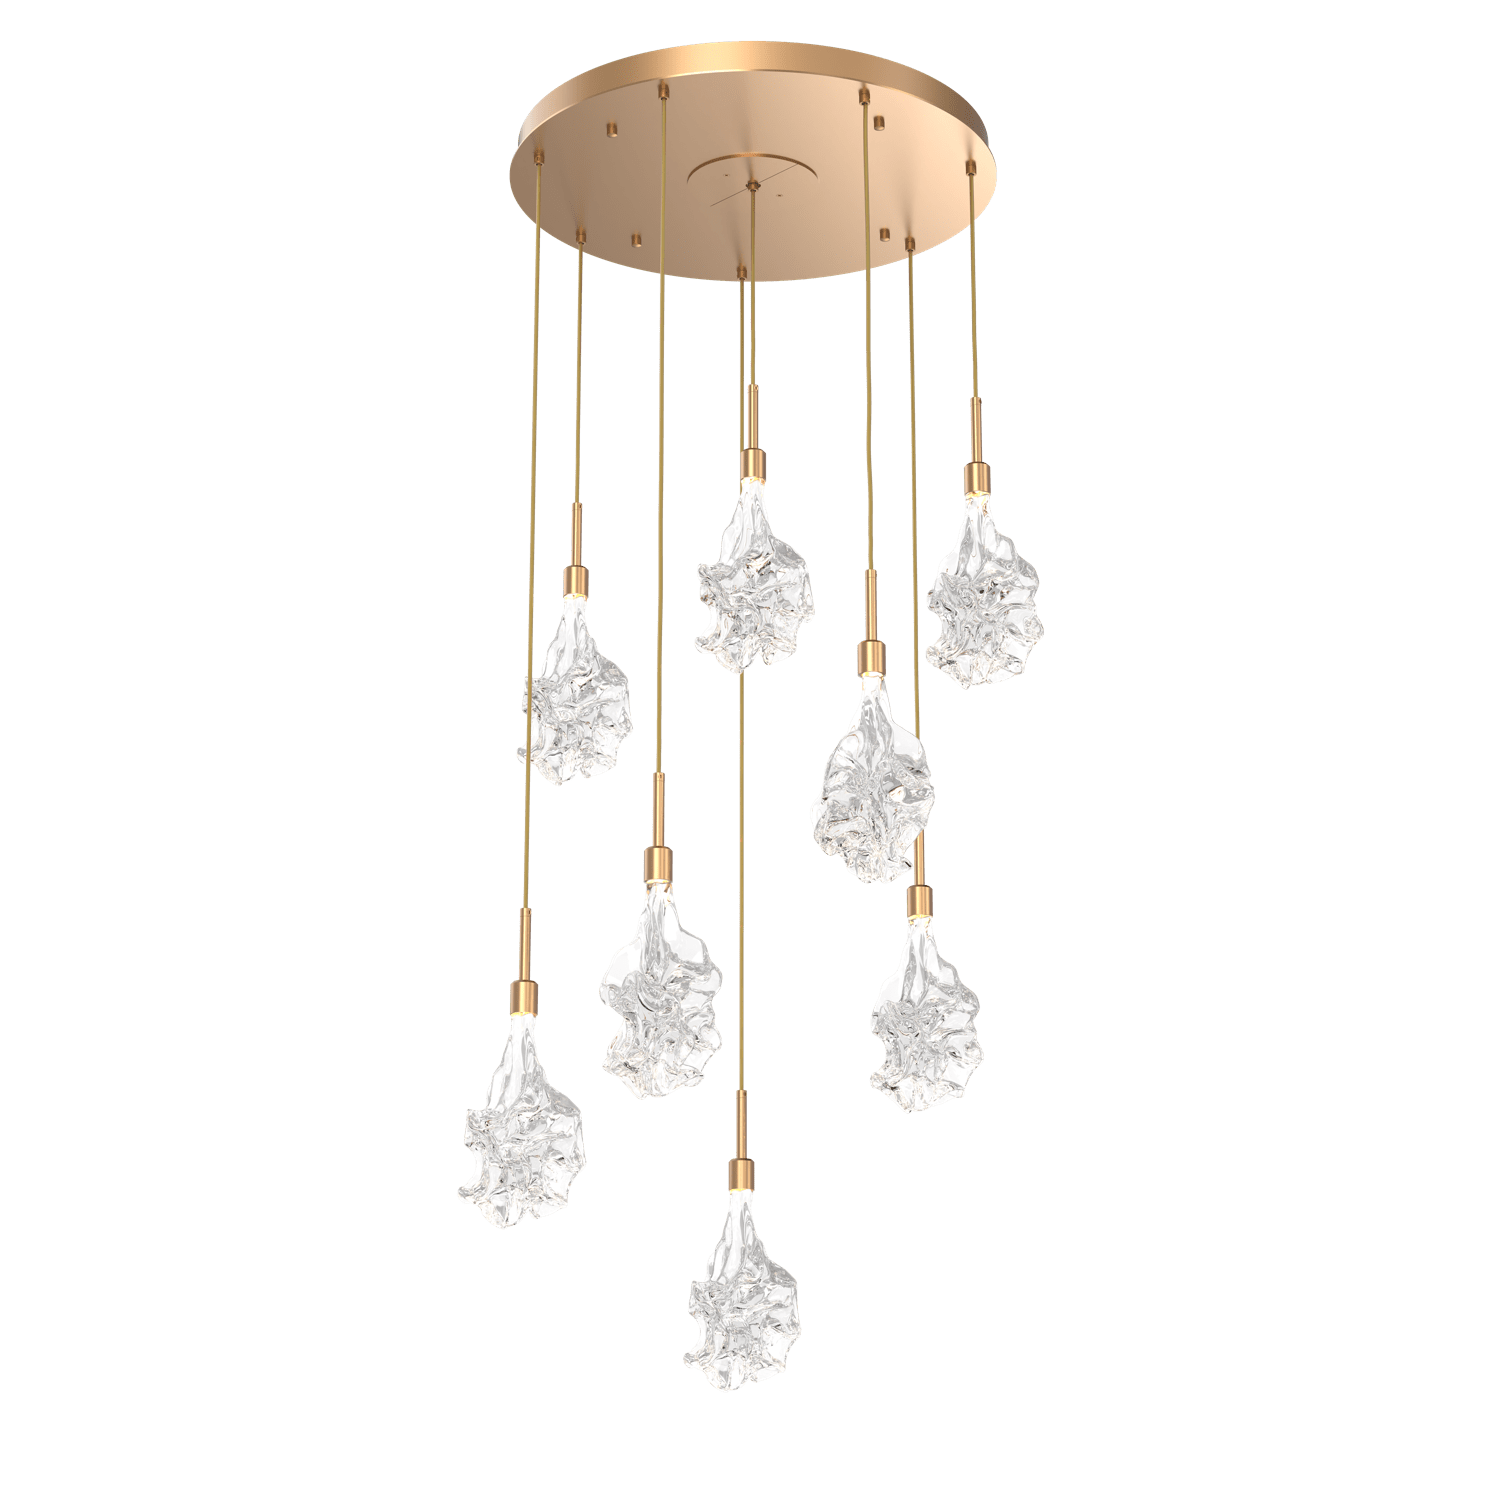 CHB0059-08-NB-Hammerton-Studio-Blossom-8-light-round-pendant-chandelier-with-novel-brass-finish-and-clear-handblown-crystal-glass-shades-and-LED-lamping